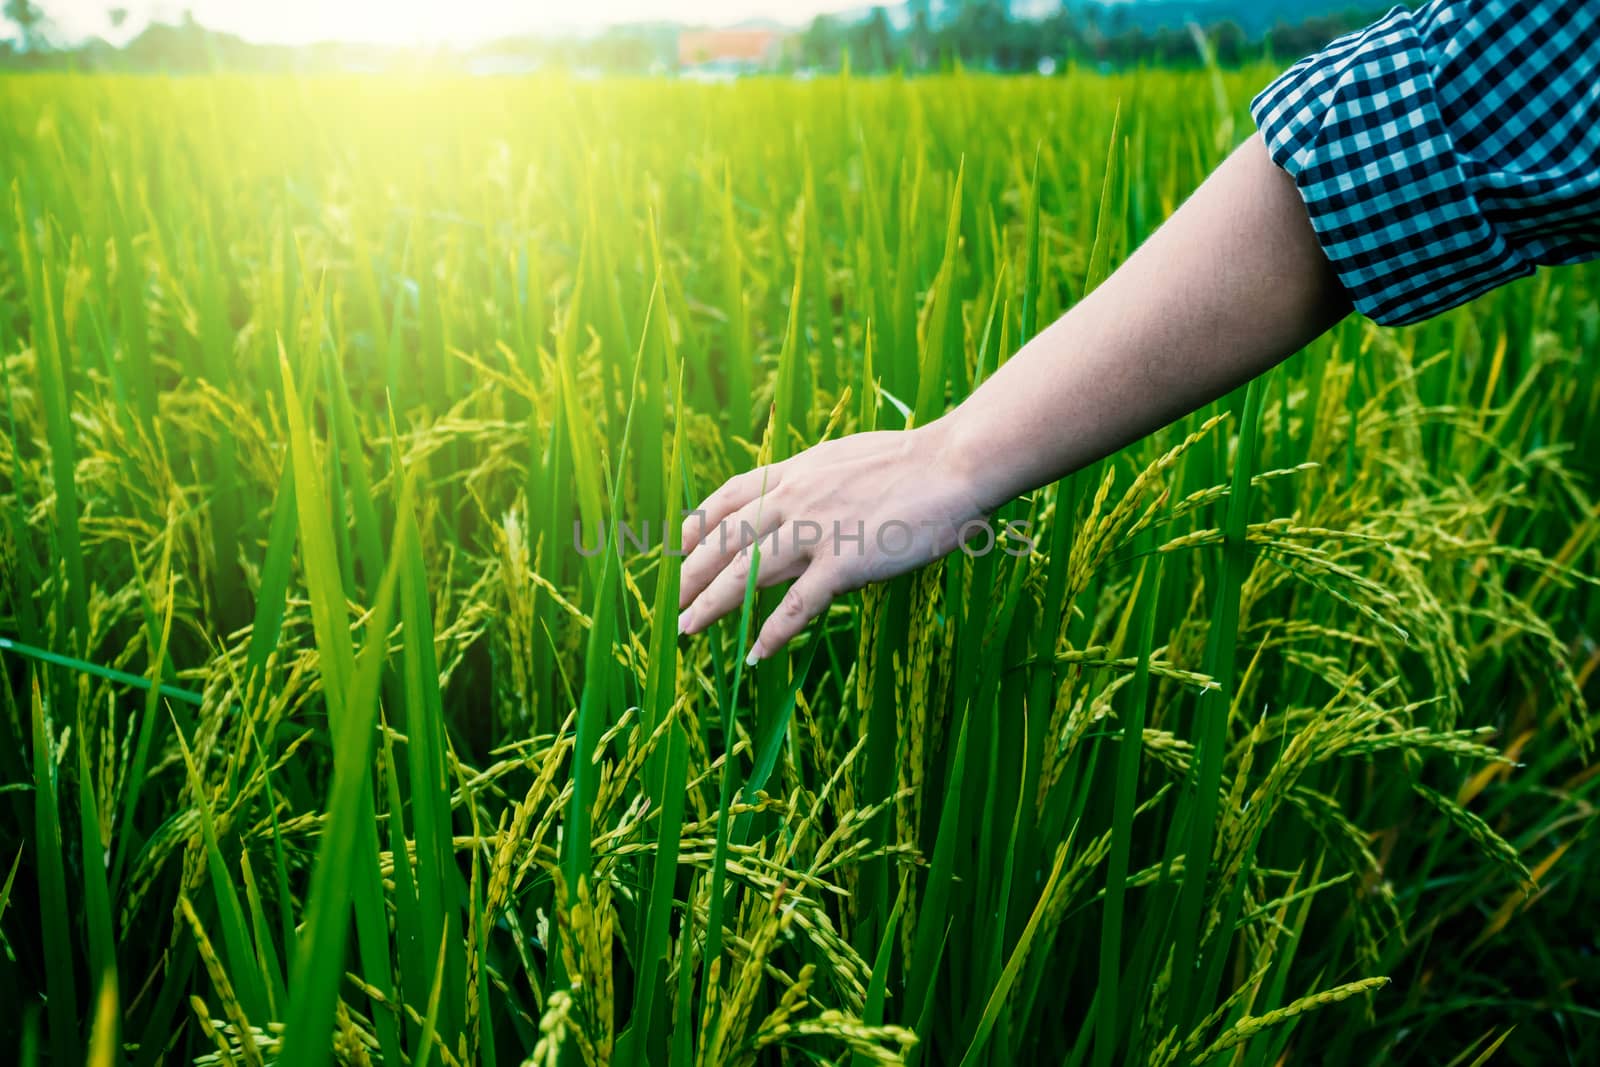 The hand of a farmer woman being fondled on top of the rice field and the sunlight